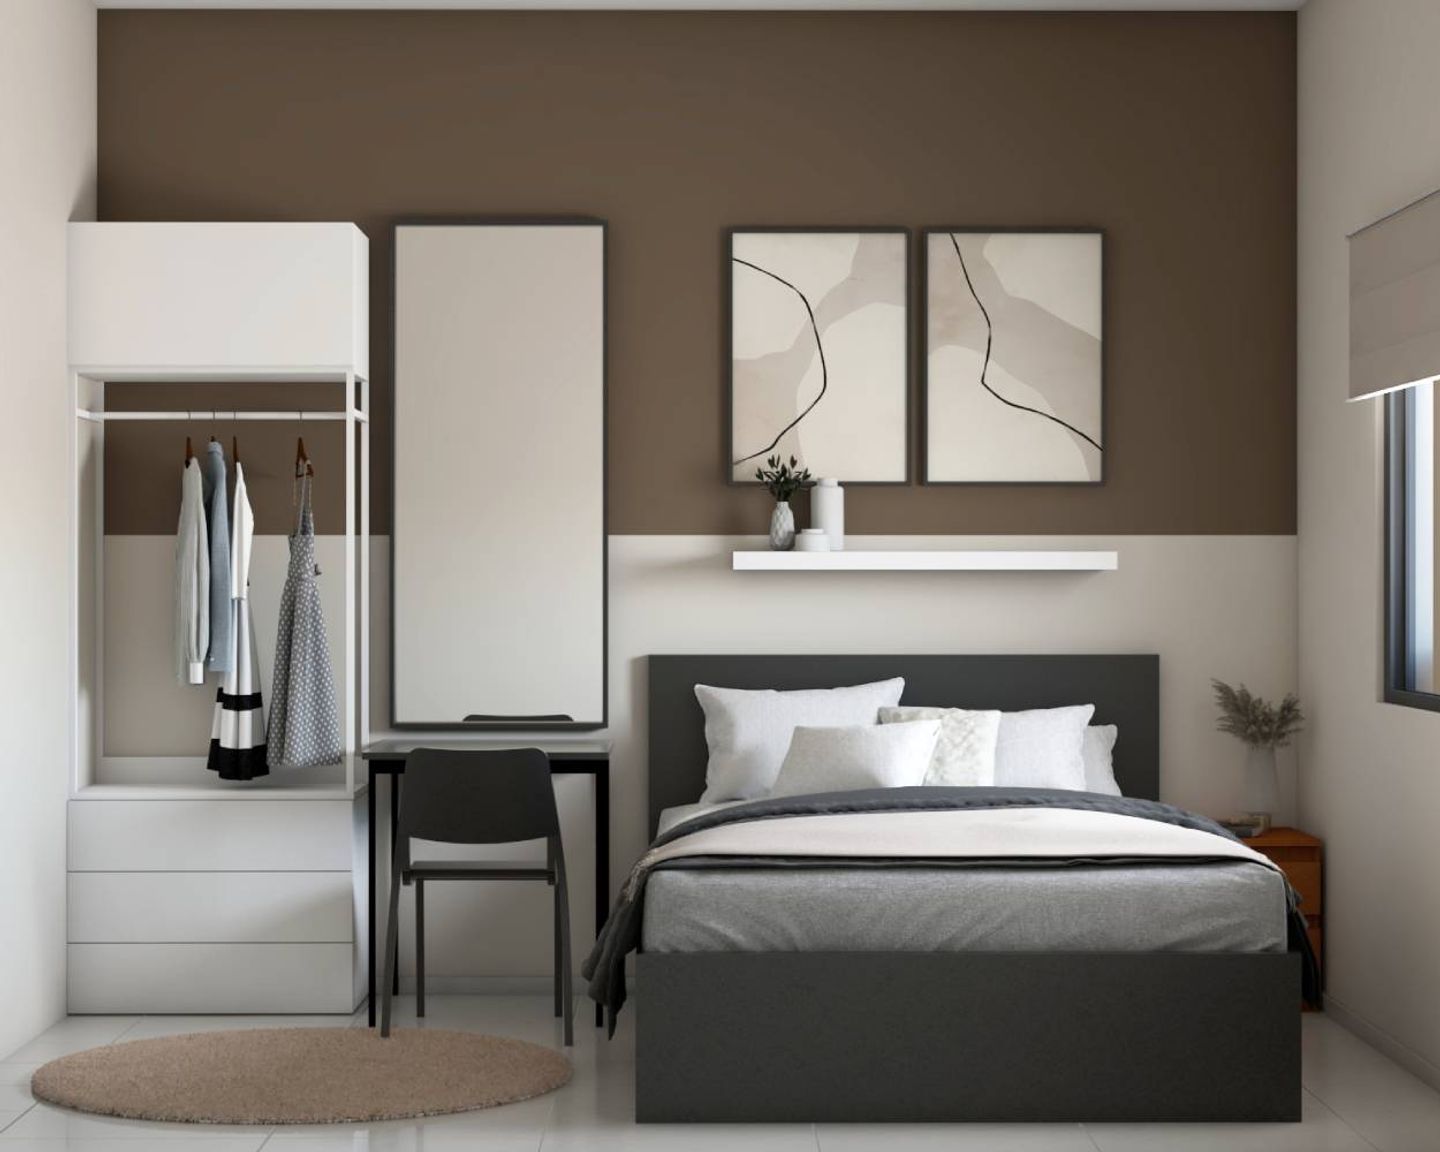 Brown And Cream-Toned Master Bedroom Design With Grey Queen-Sized Bed And Tall White Storage Unit - Livspace